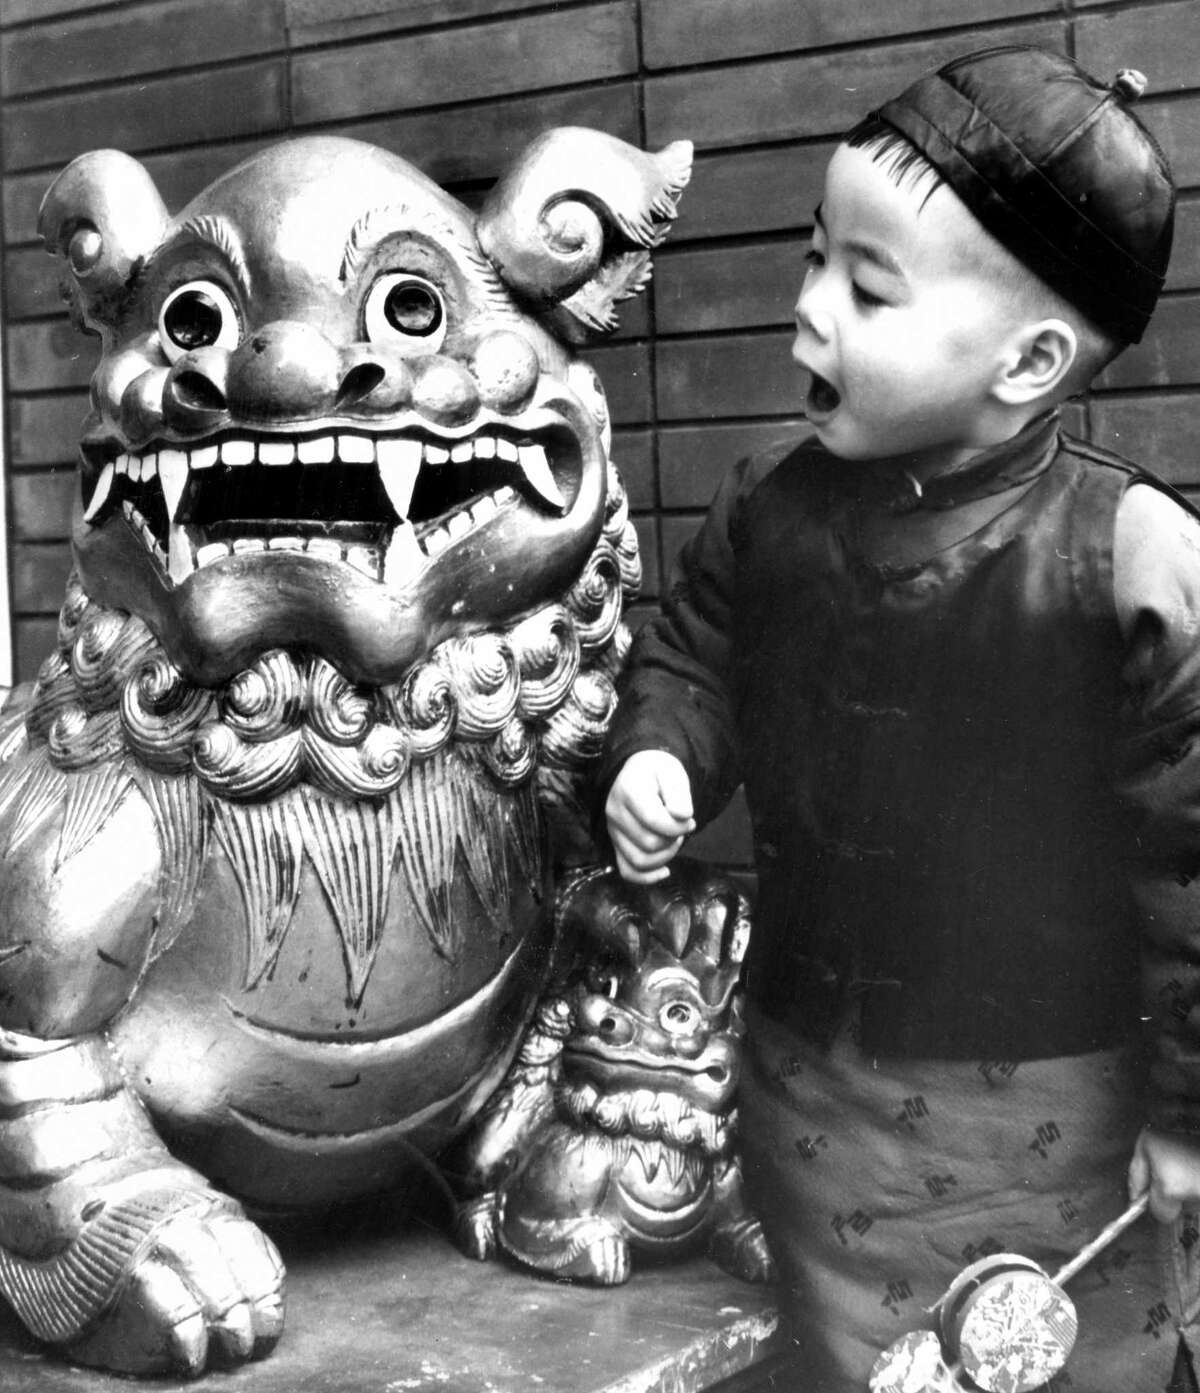 A child standing next to a lion in Chinatown is ready to celebrate the Chinese New Year in 1975. The Chinese won the right to use fireworks in the parade as part of their religion in 1908.